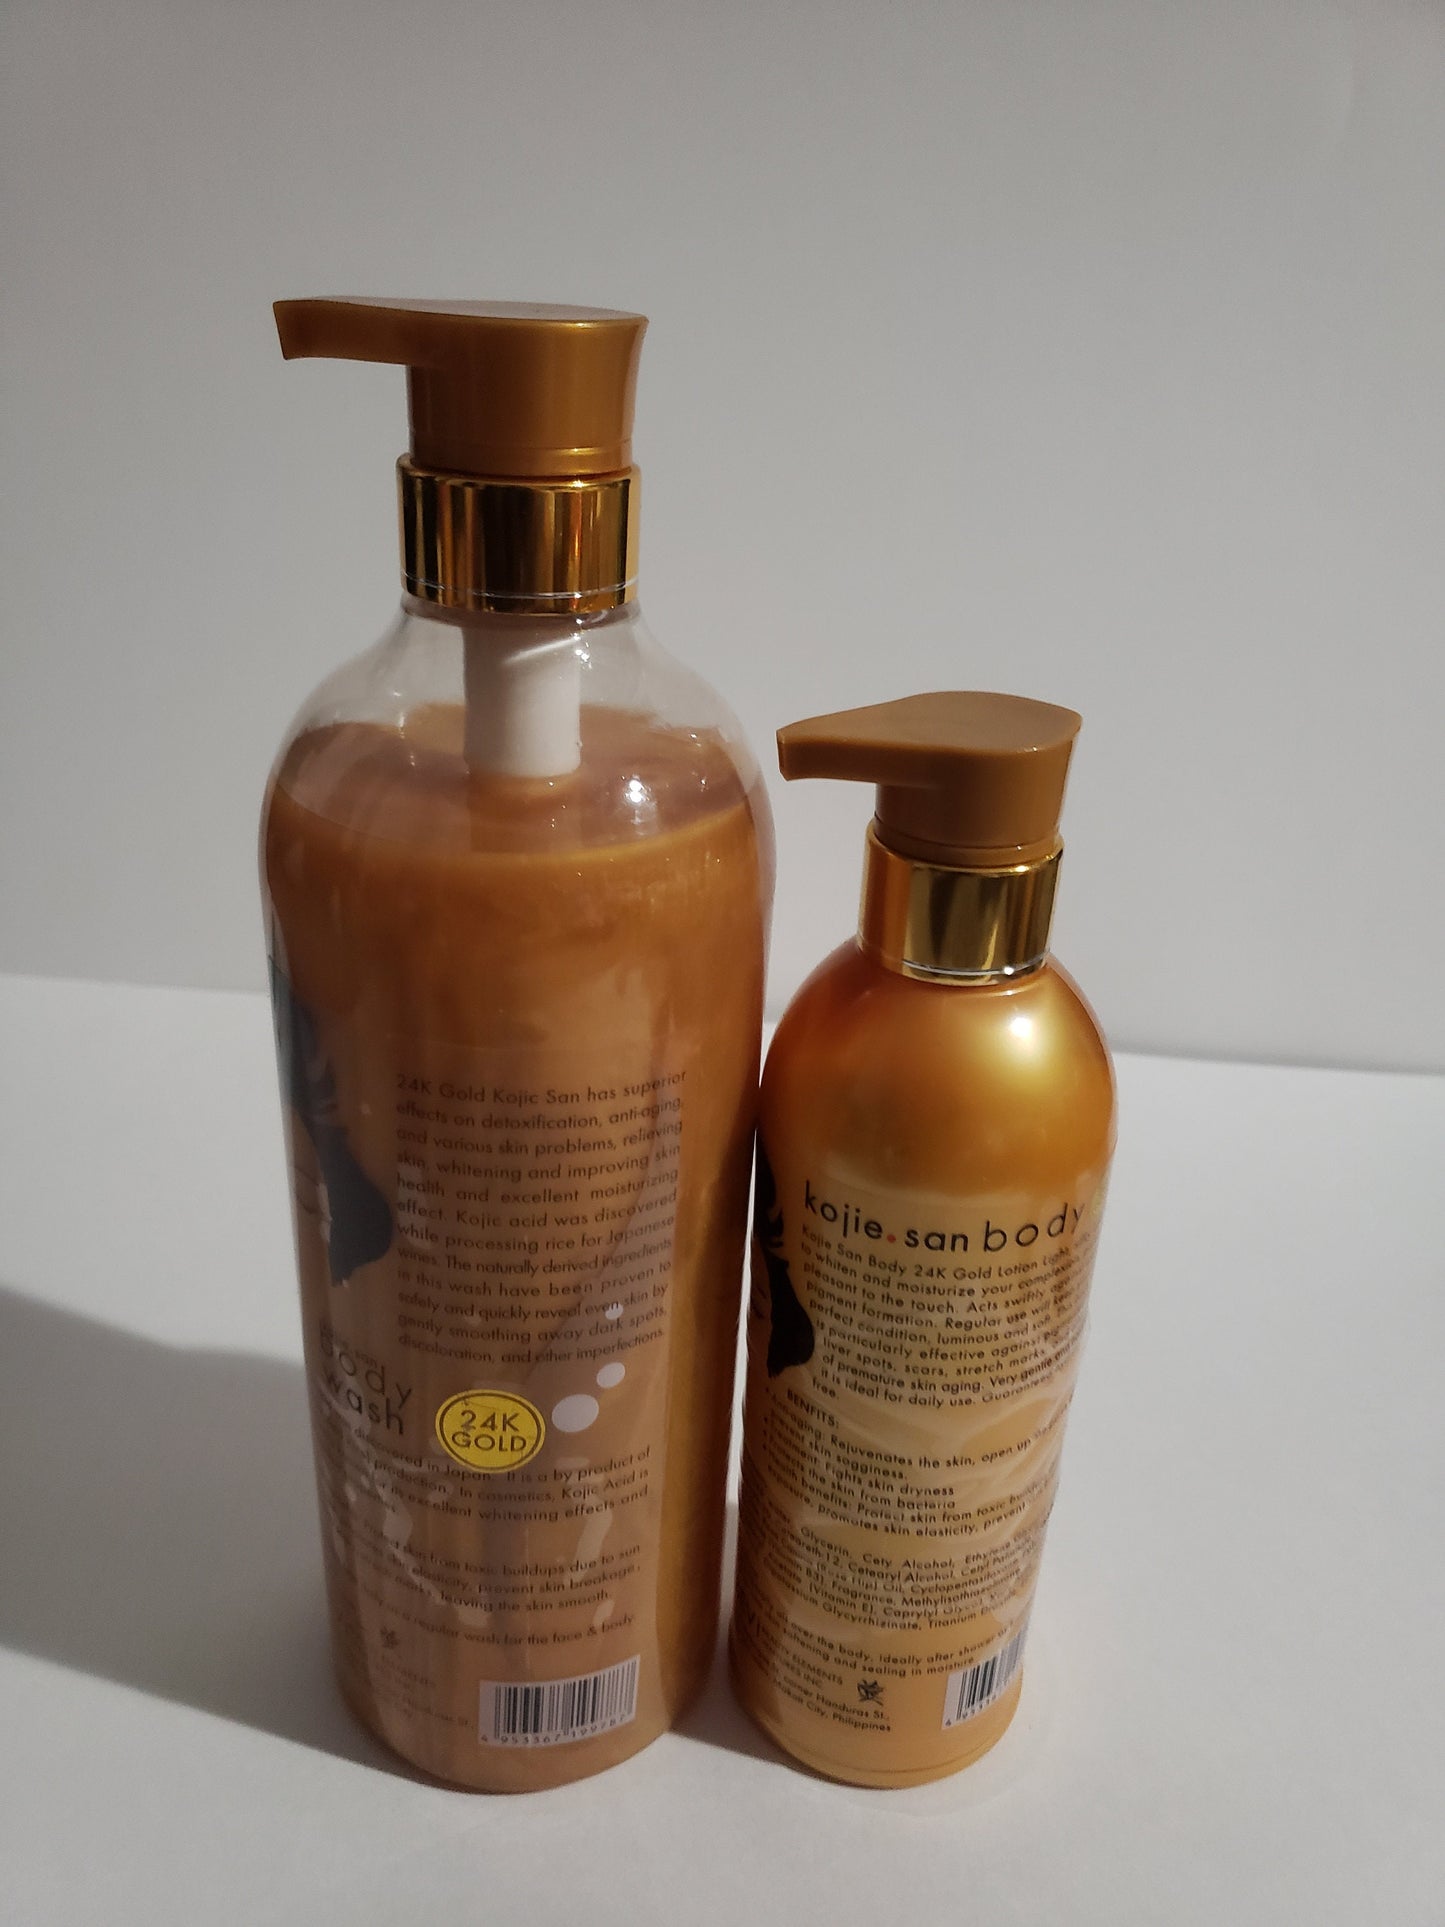 24k gold kojie san body wash and lotion 500g